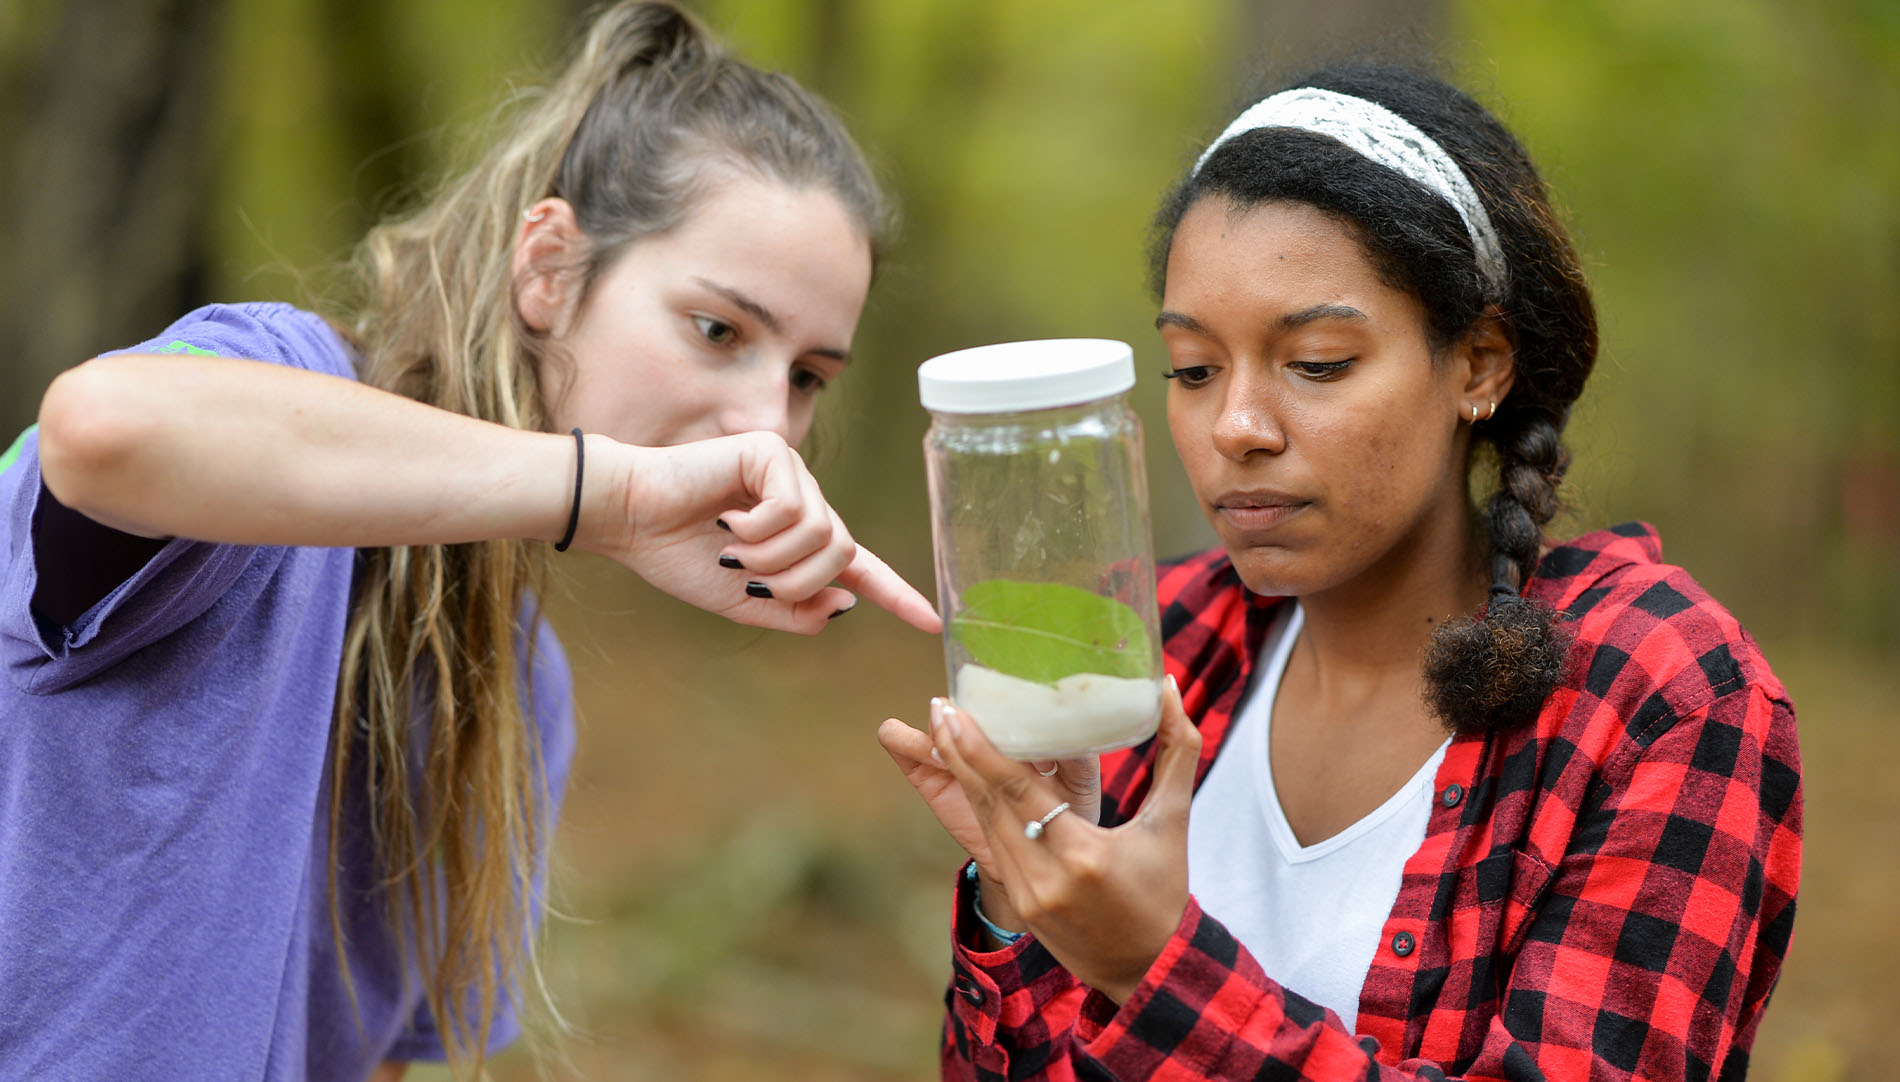 two female students examening plants and specimen in a glass jar